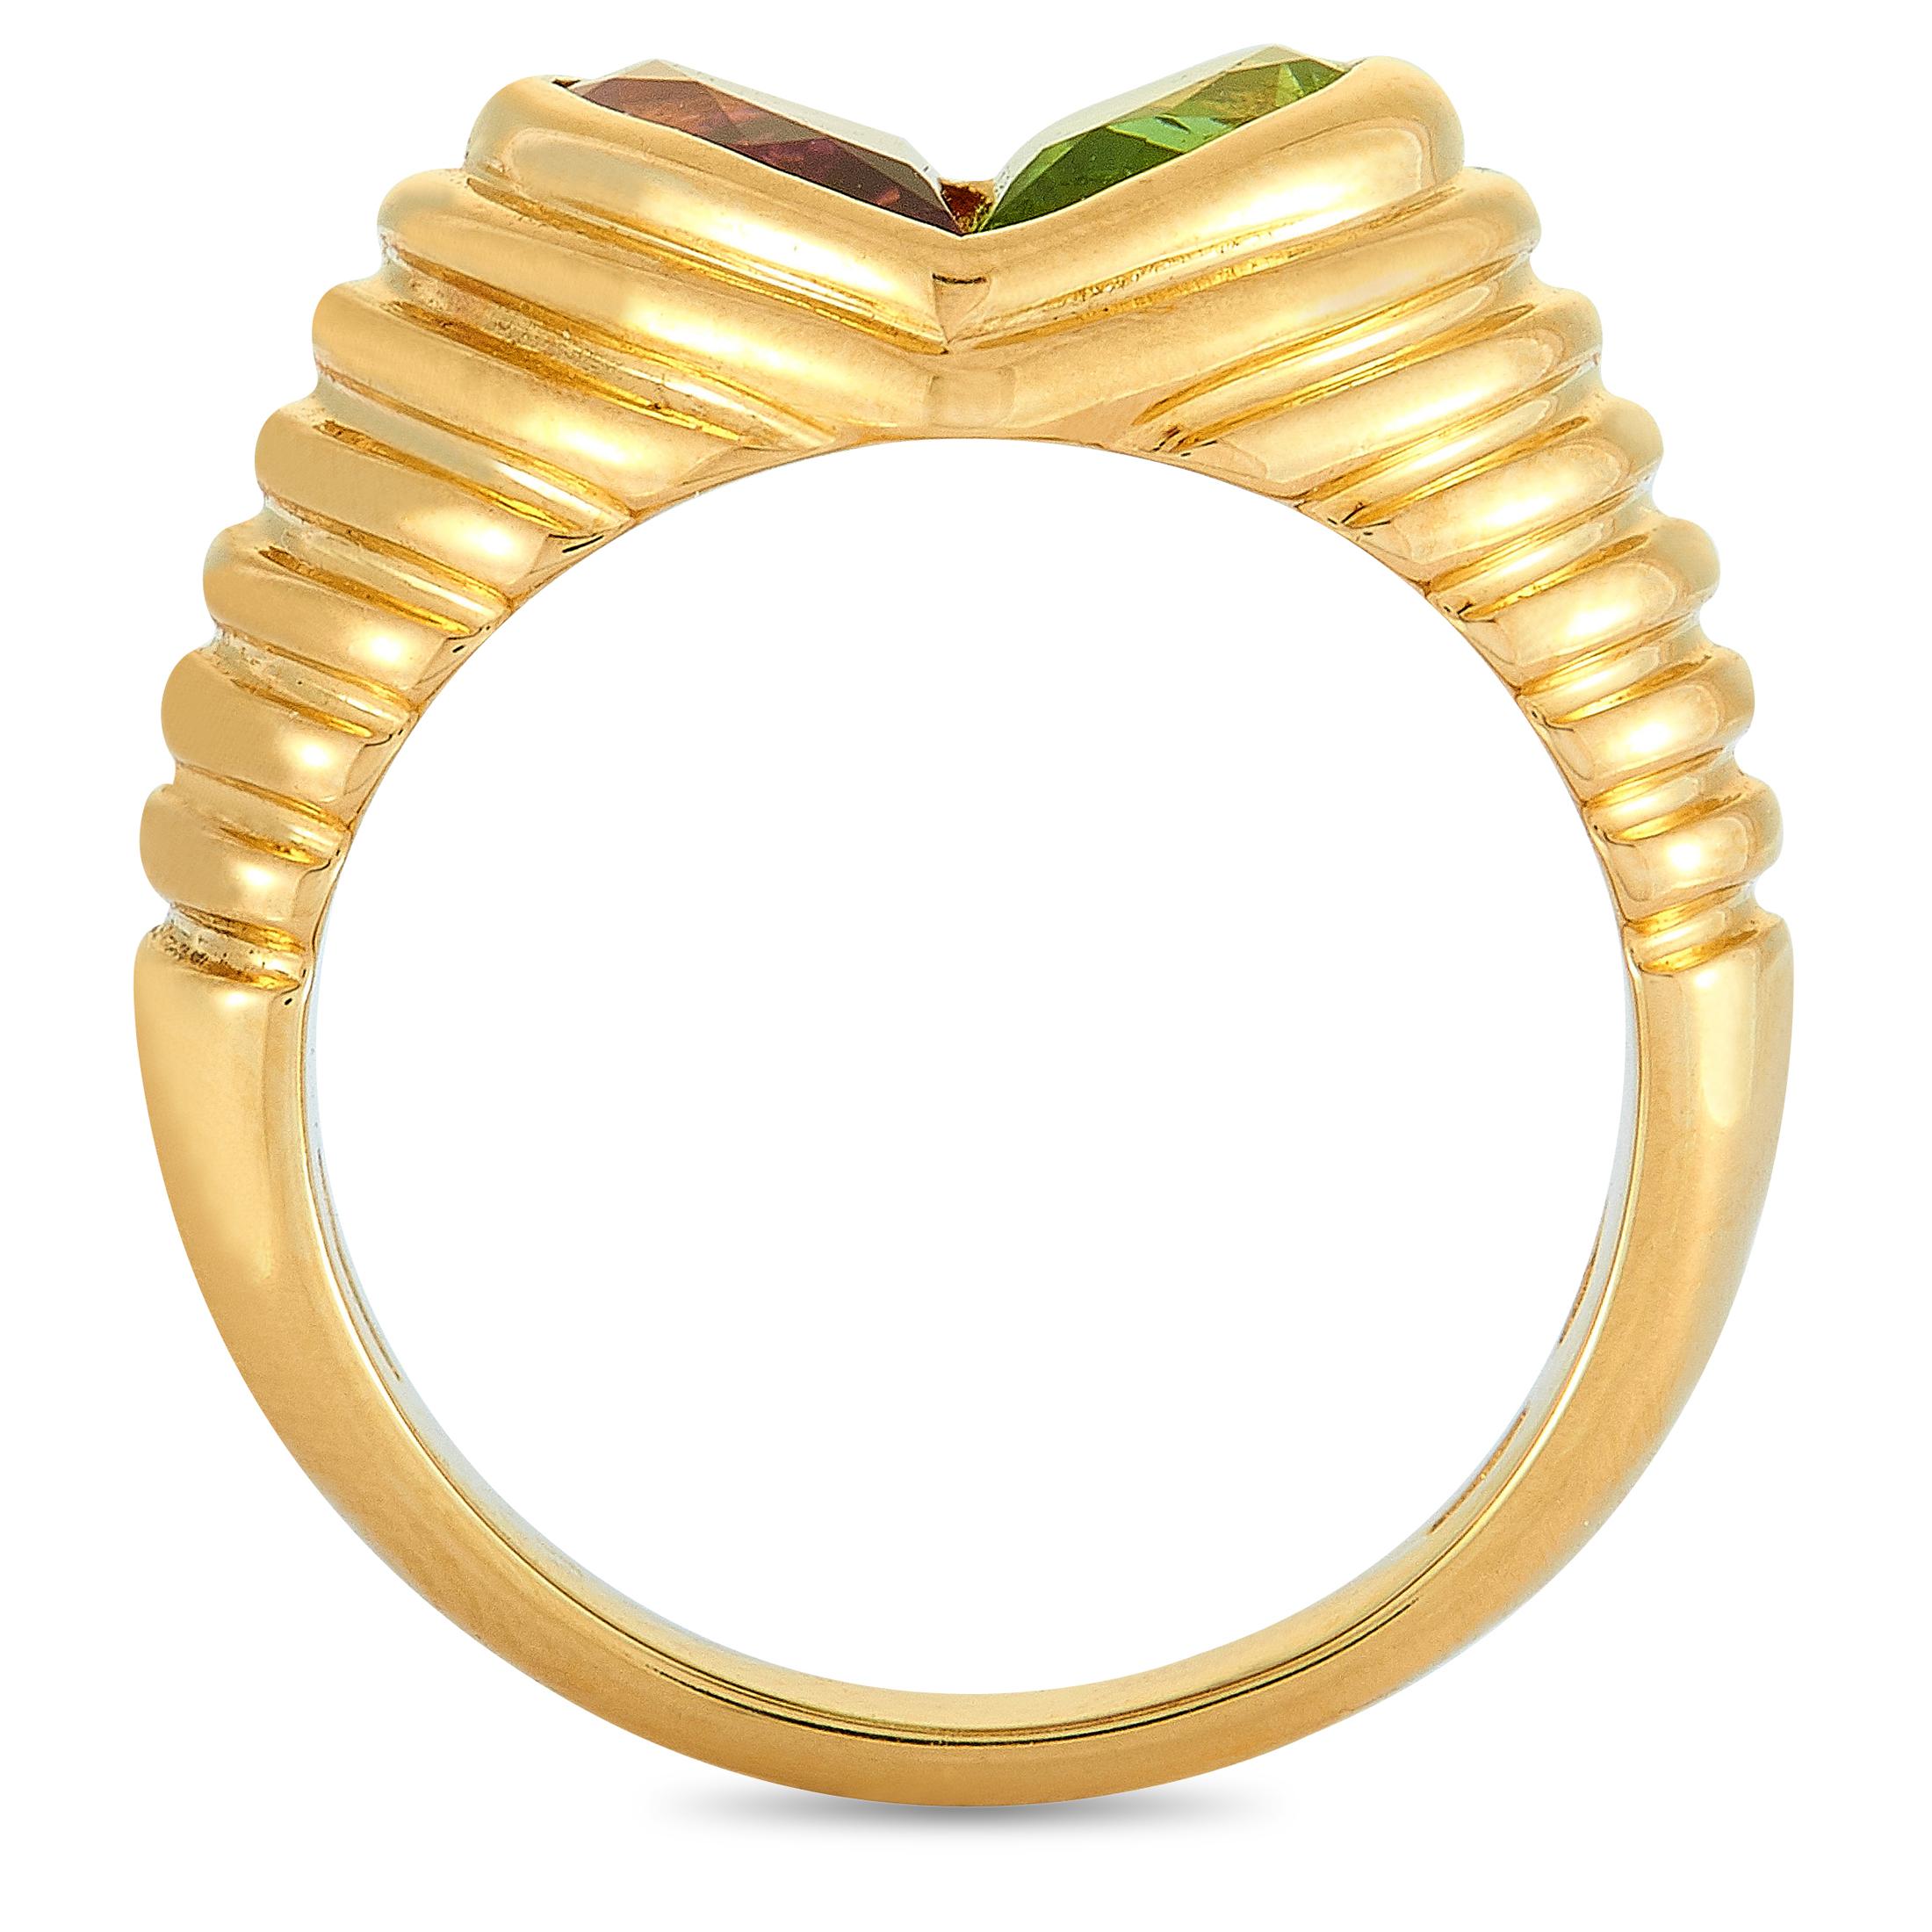 The Bvlgari “Doppio” ring is crafted from 18K yellow gold and set with a peridot and a tourmaline. The ring weighs 10.1 grams, boasting band thickness of 3 mm and top height of 5 mm, while top dimensions measure 10 by 11 mm.

This item is offered in